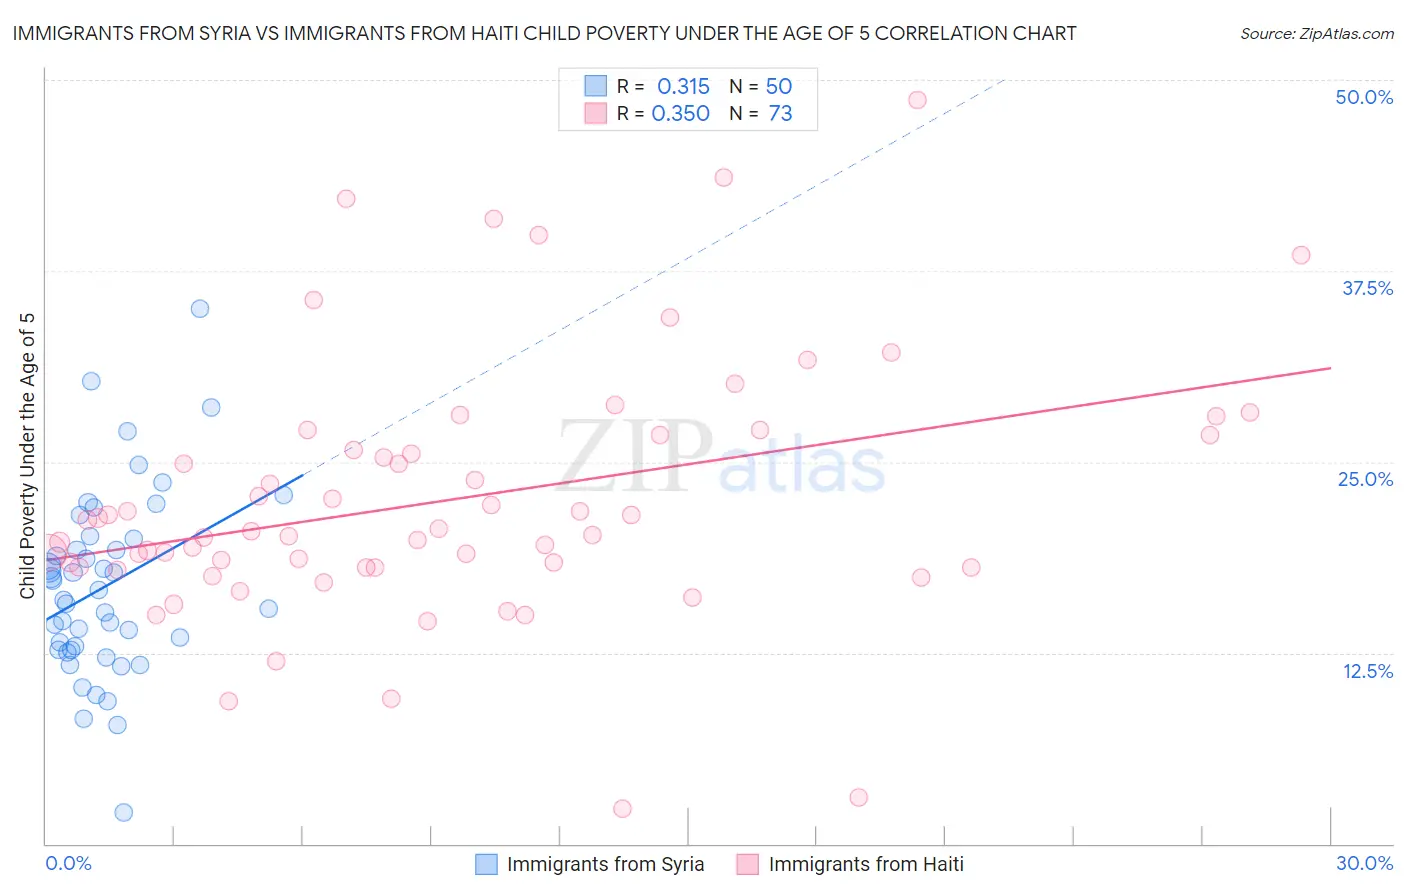 Immigrants from Syria vs Immigrants from Haiti Child Poverty Under the Age of 5